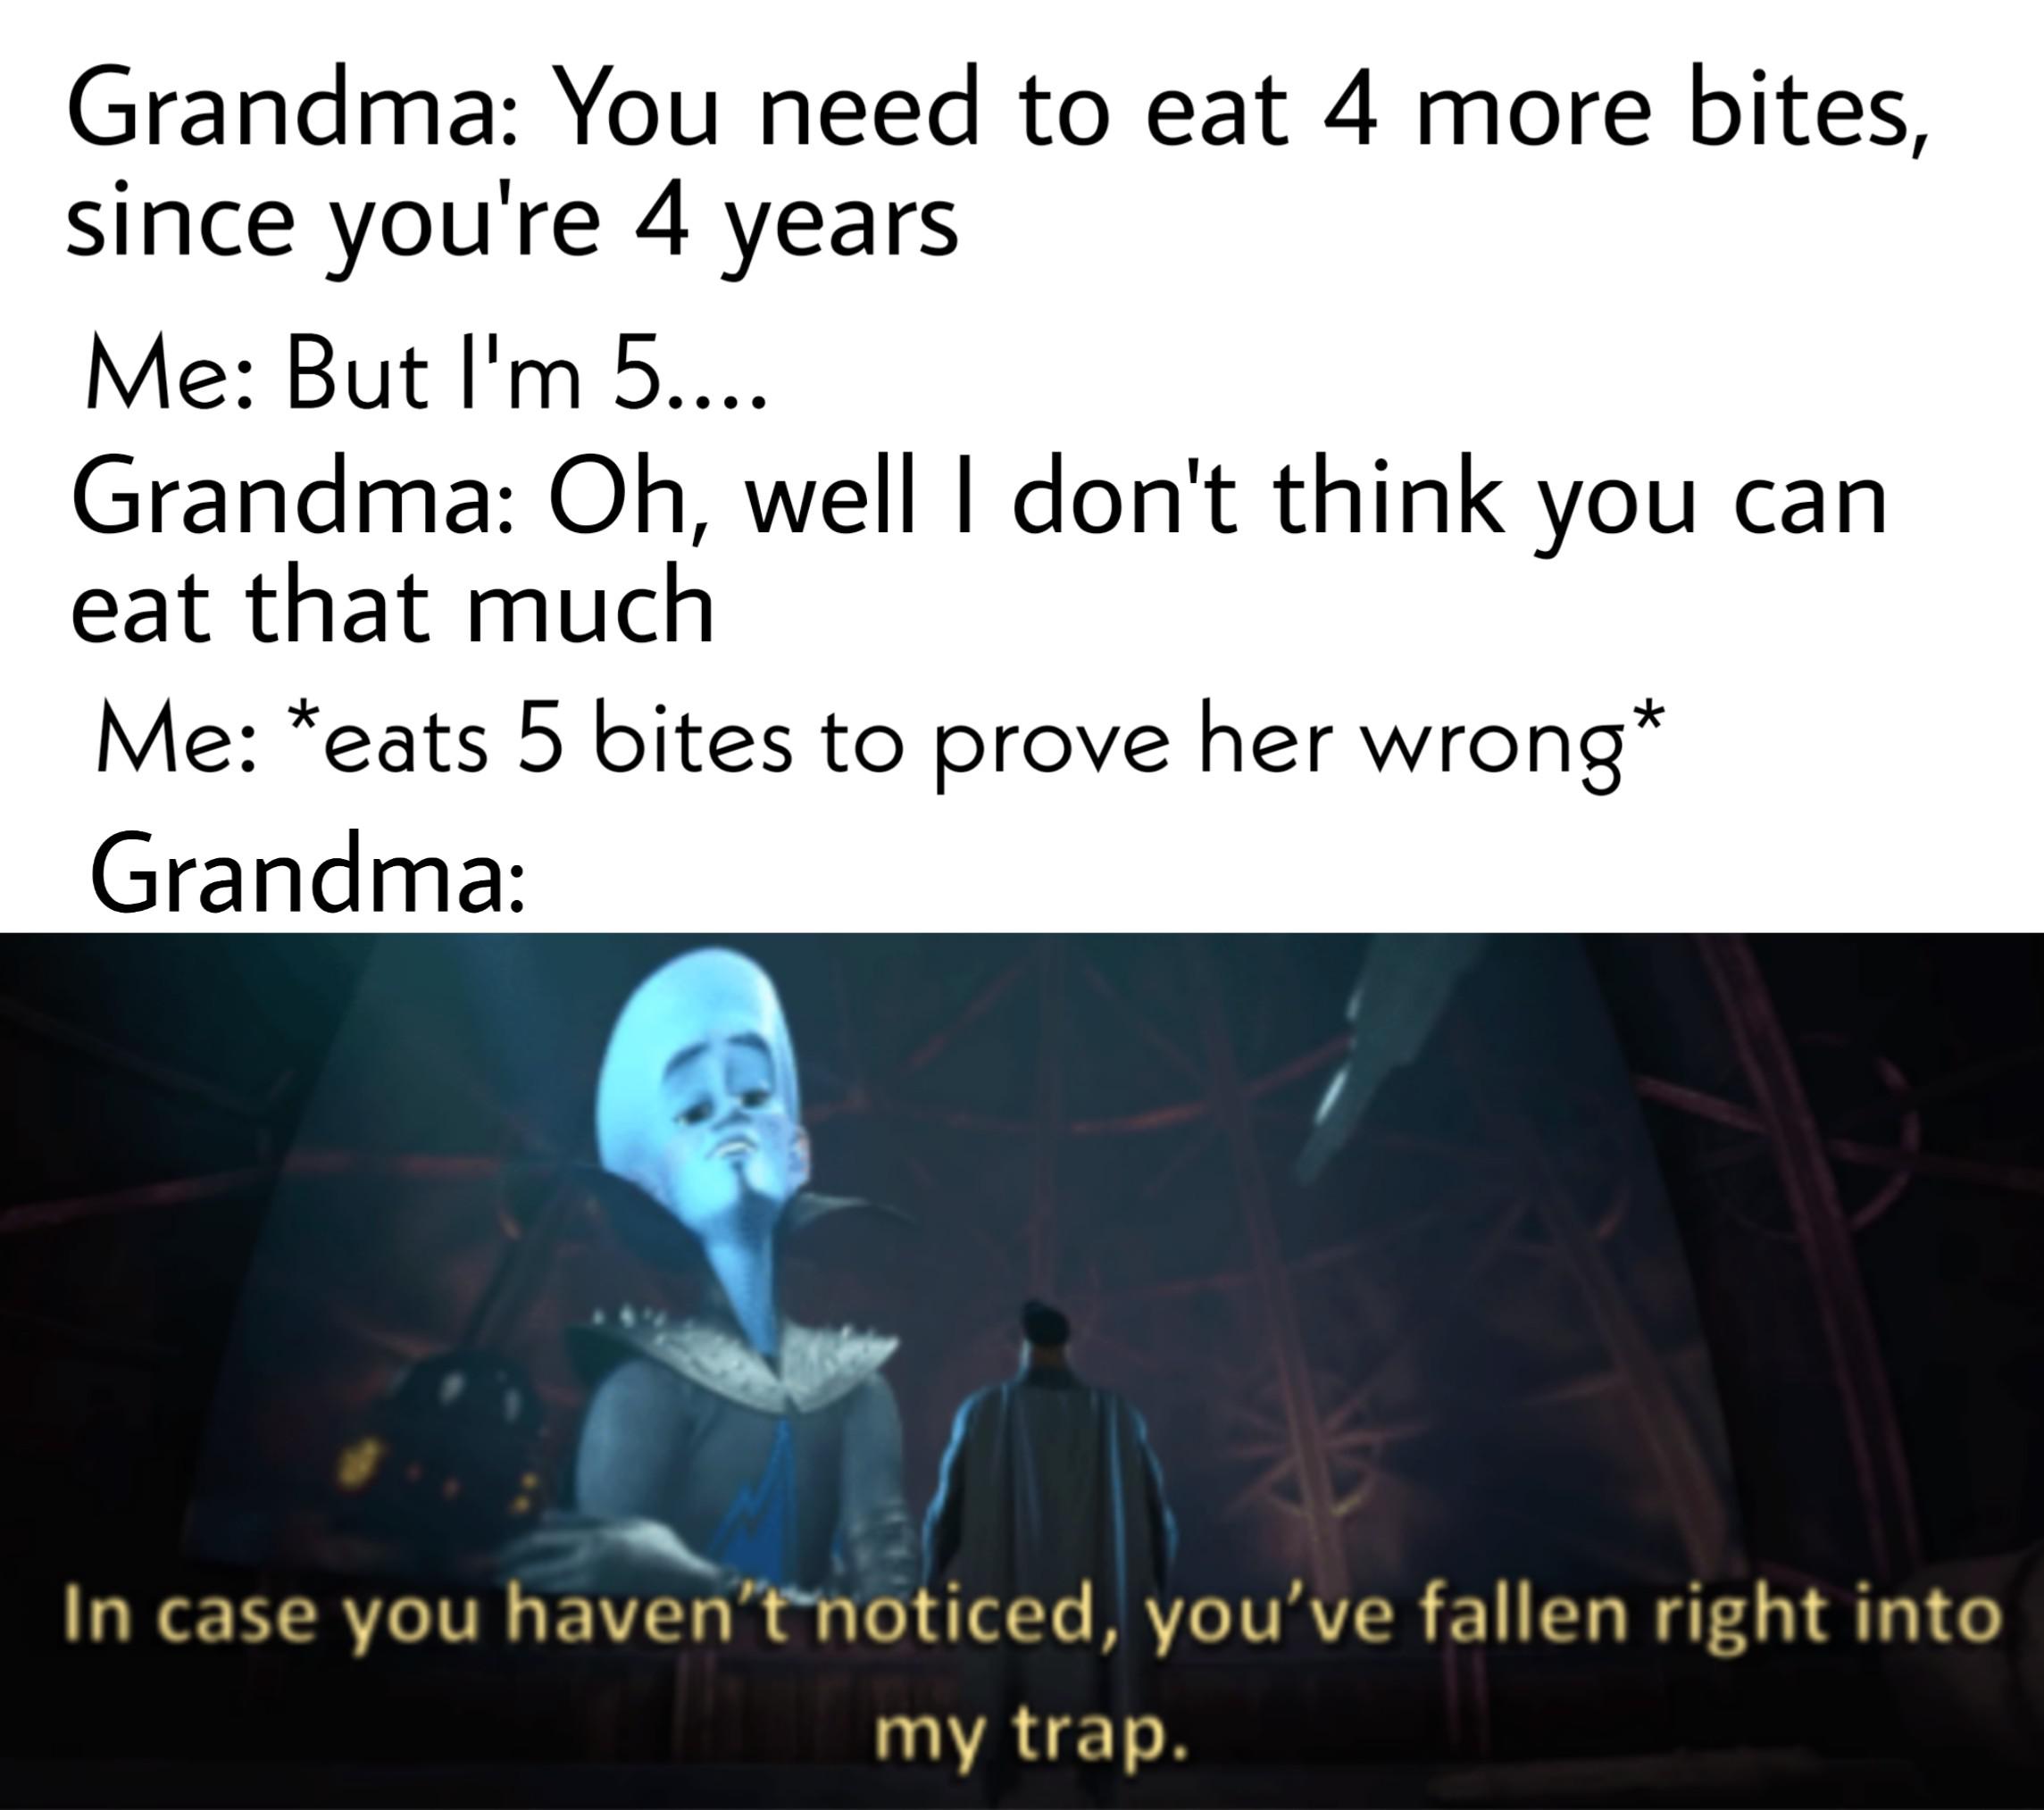 Wholesome memes,  Wholesome Memes Wholesome memes,  text: Grandma: You need to eat 4 more bites, since you're 4 years Me: But 11m 5 Grandma: Oh, well I don't think you can eat that much Me: *eats 5 bites to prove her wrong Grandma: In case you haven